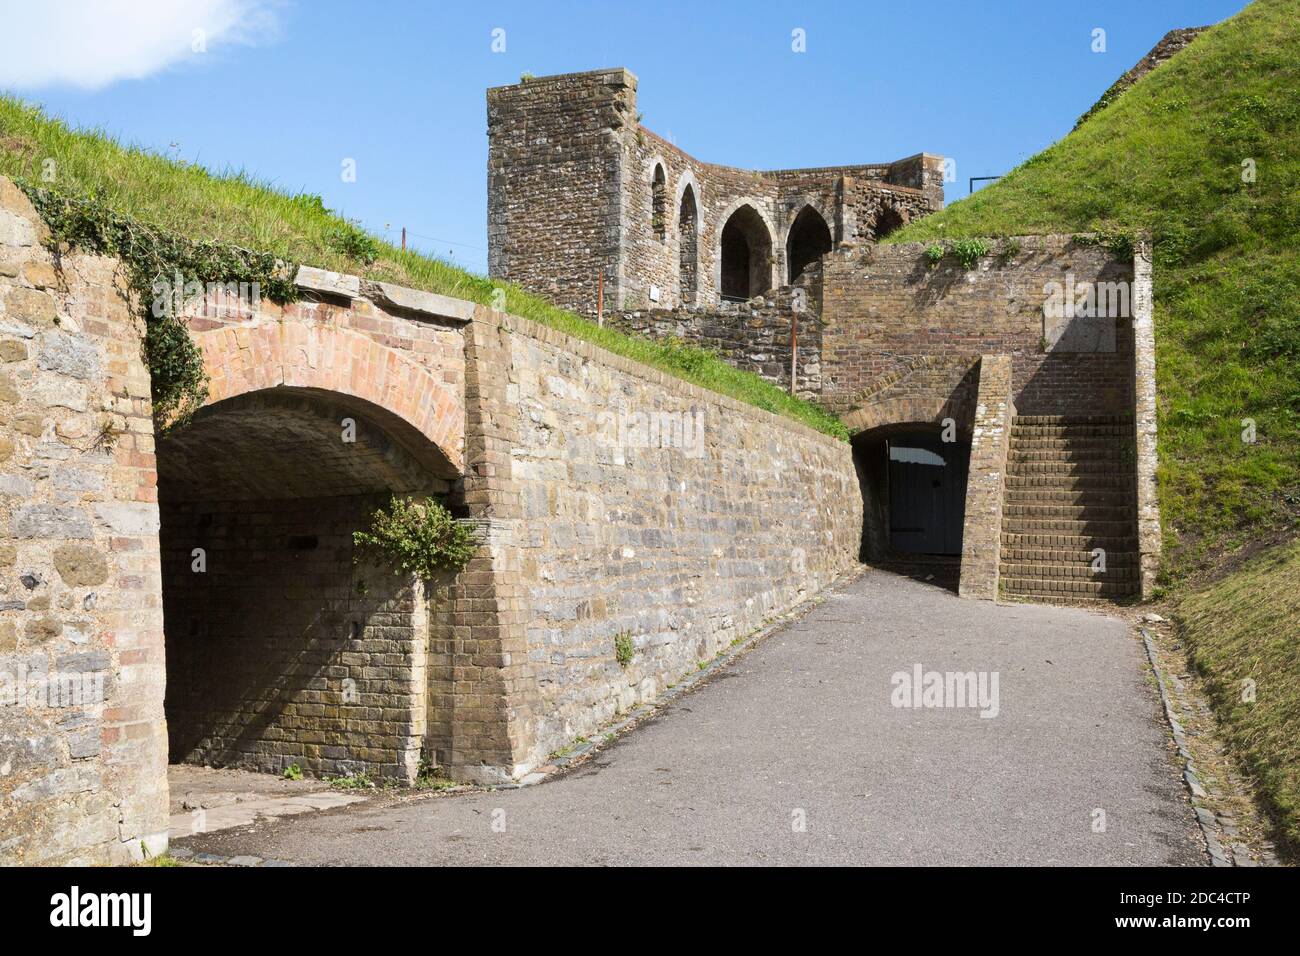 Defences, including tunnels built during the Napoleonic era, between the outer curtain wall (Left) and inner circuit walls of Dover Castle, Dover, Kent. UK. Avranches Tower is middle left against the blue sky. (121) Stock Photo